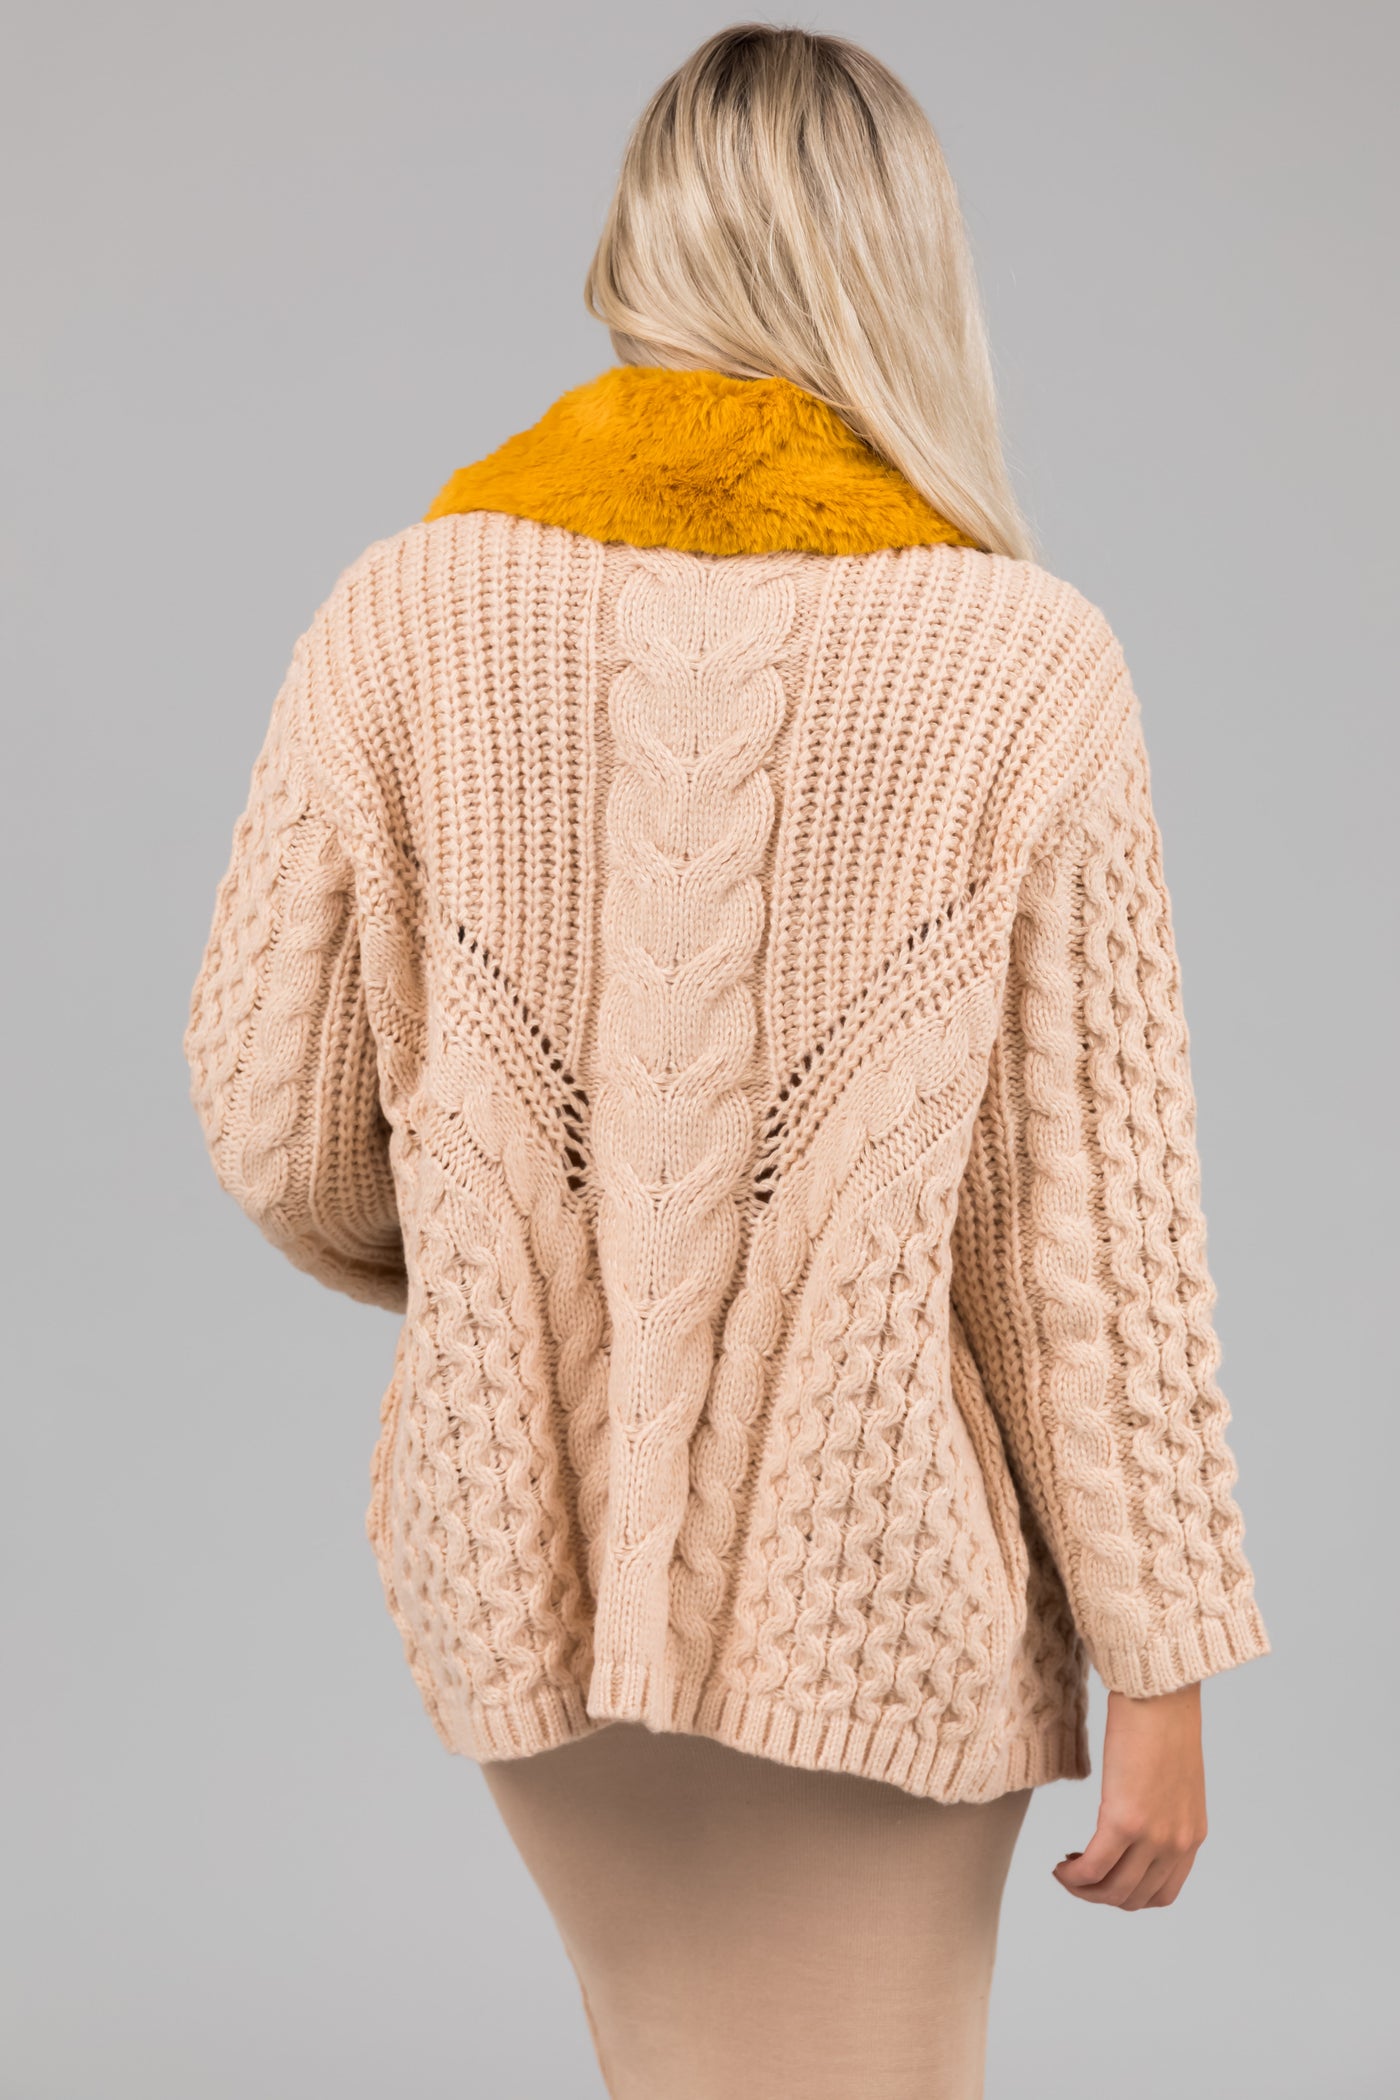 Desert Sand Faux Fur Collared Cable Knit Cardigan